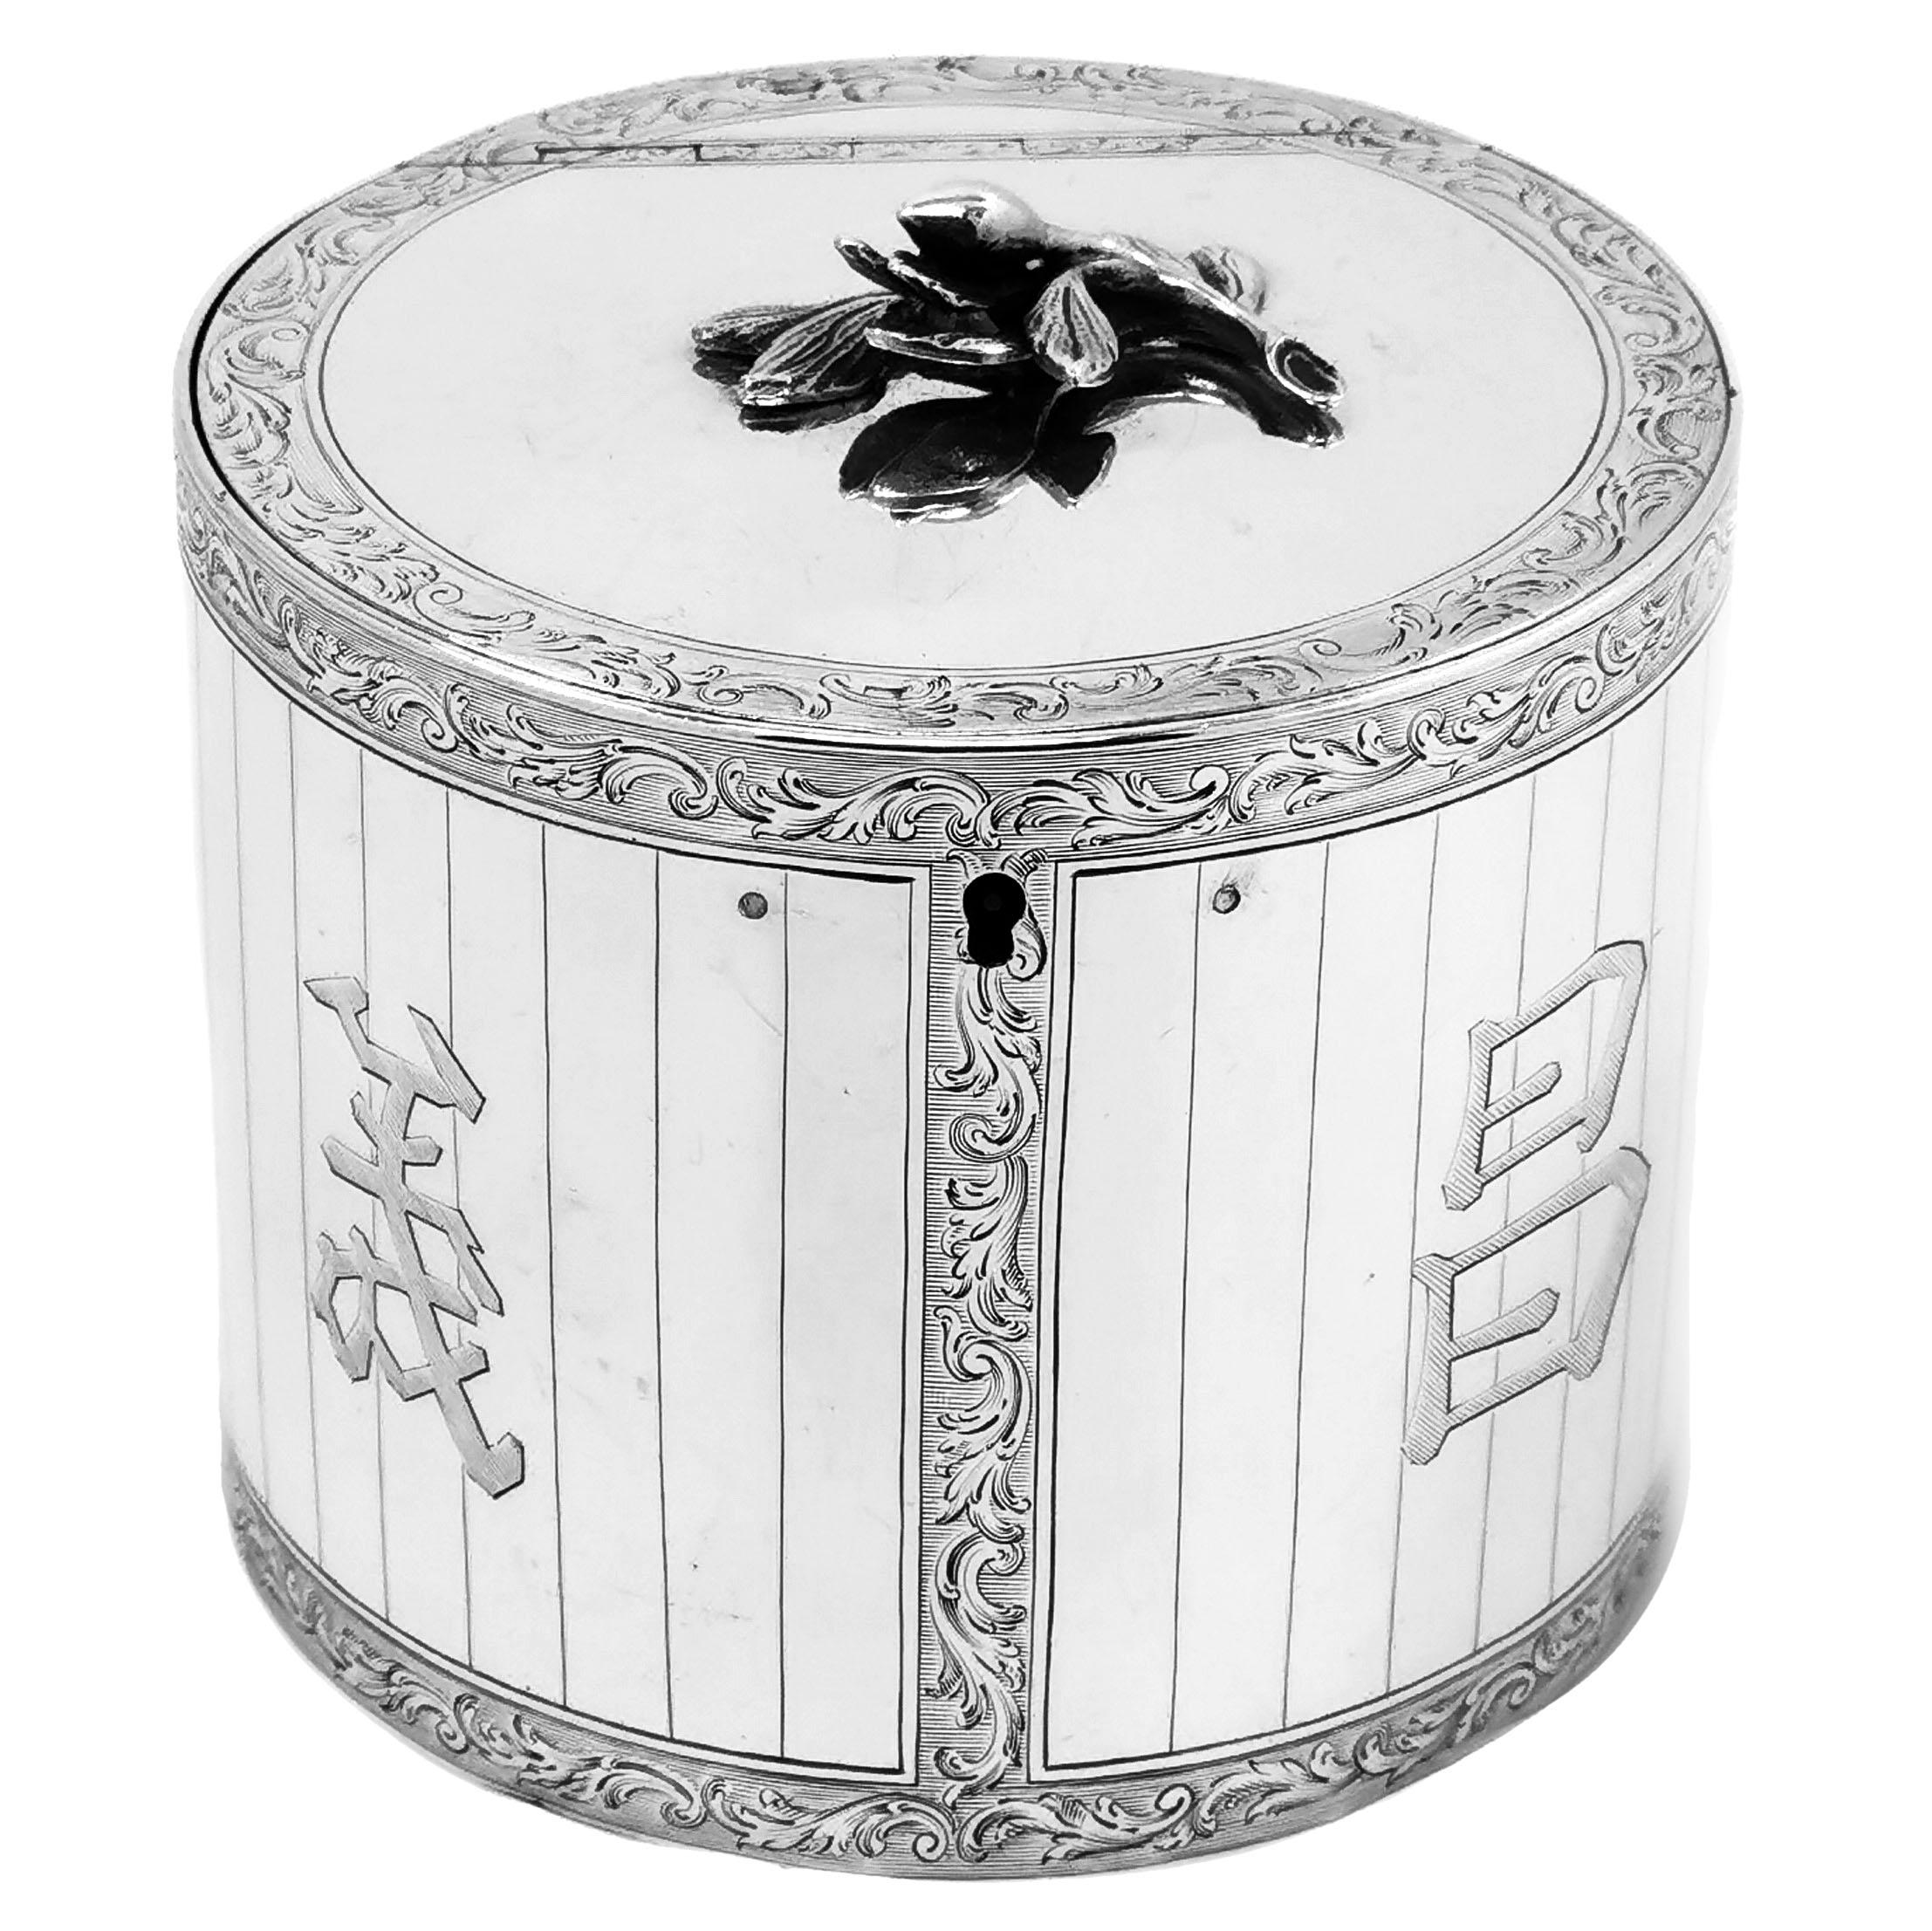 A beautiful Antique George III solid Silver Tea Caddy in a traditional circular straight sided can shaped form and is decorated with beautiful and detailed engravings. These engravings form ornate scroll borders which create panels on the side of